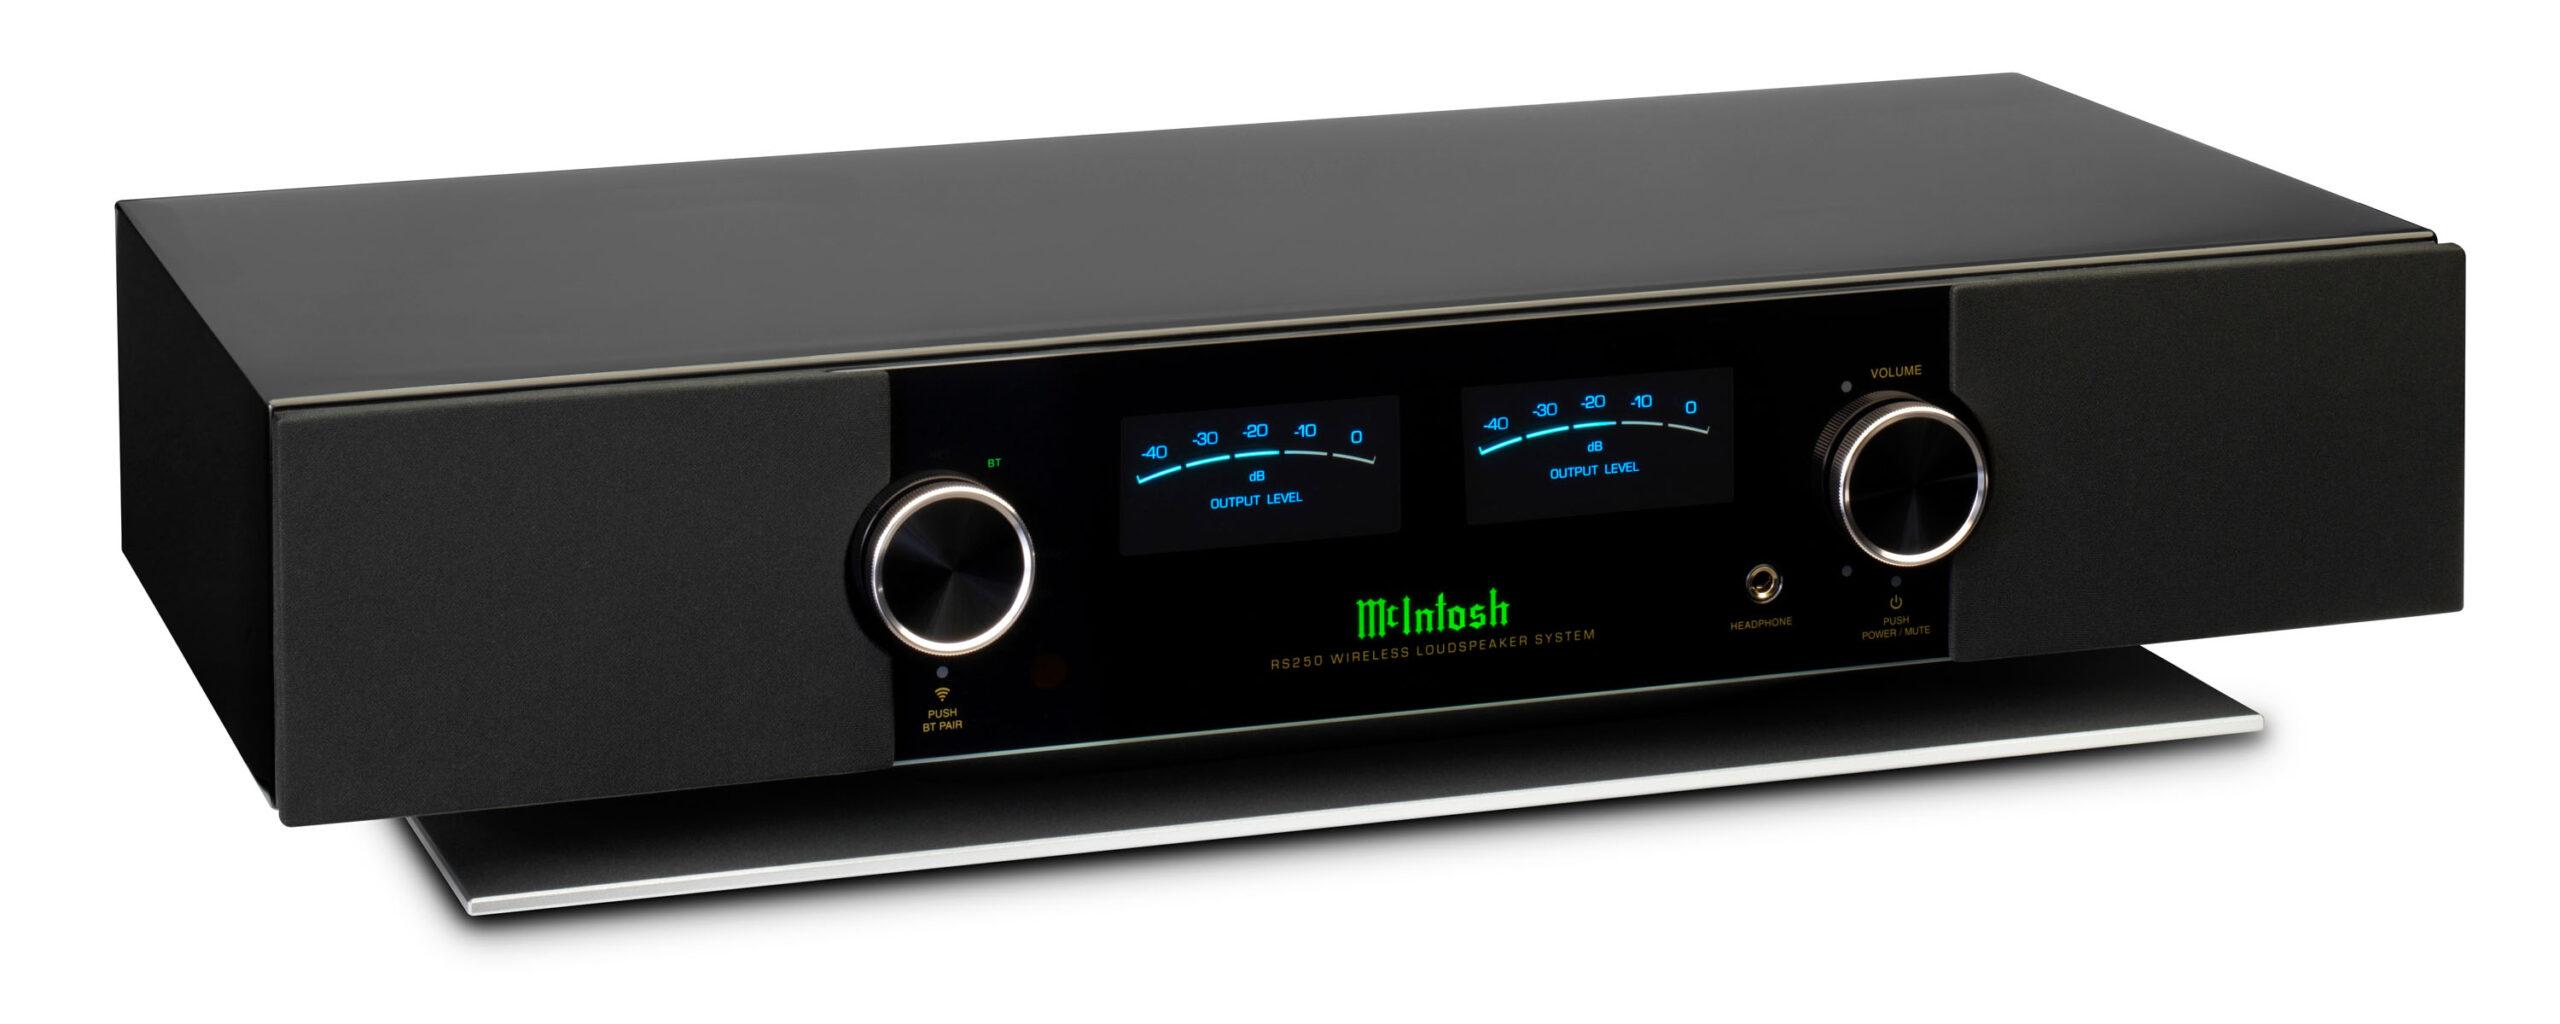 Two wireless speakers, the RS150 and RS250, offer streaming convenience with unmistakable McIntosh style, quality & performance. McIntosh 7fed8e26 rs250 angle hi res scaled